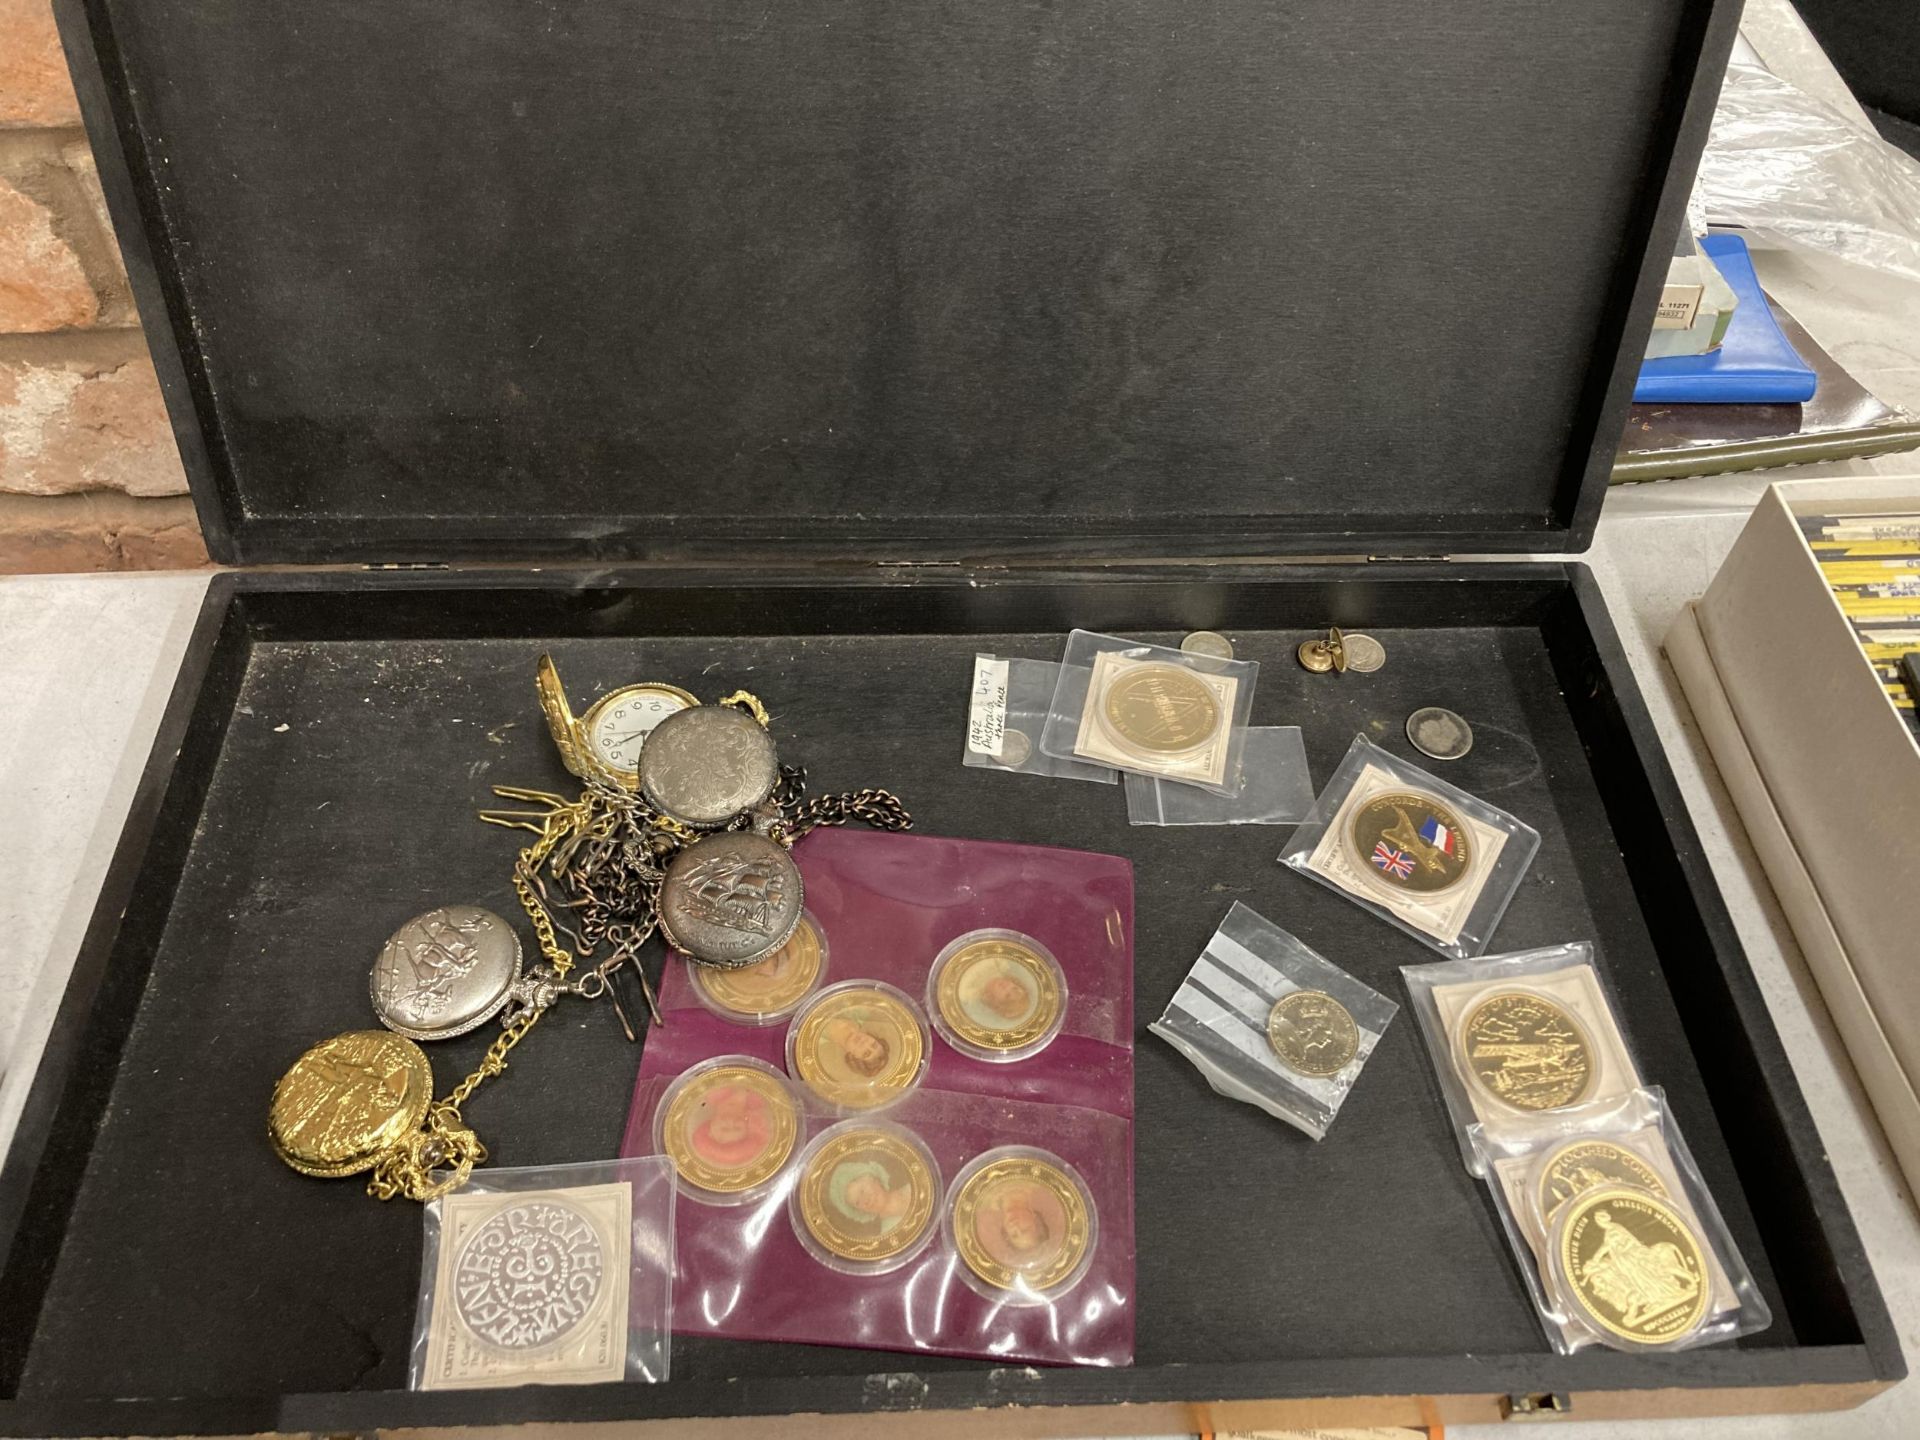 A CASE OF ASSORTED COMMEMORATIVE COINS, MODERN POCKET WATCHES ETC